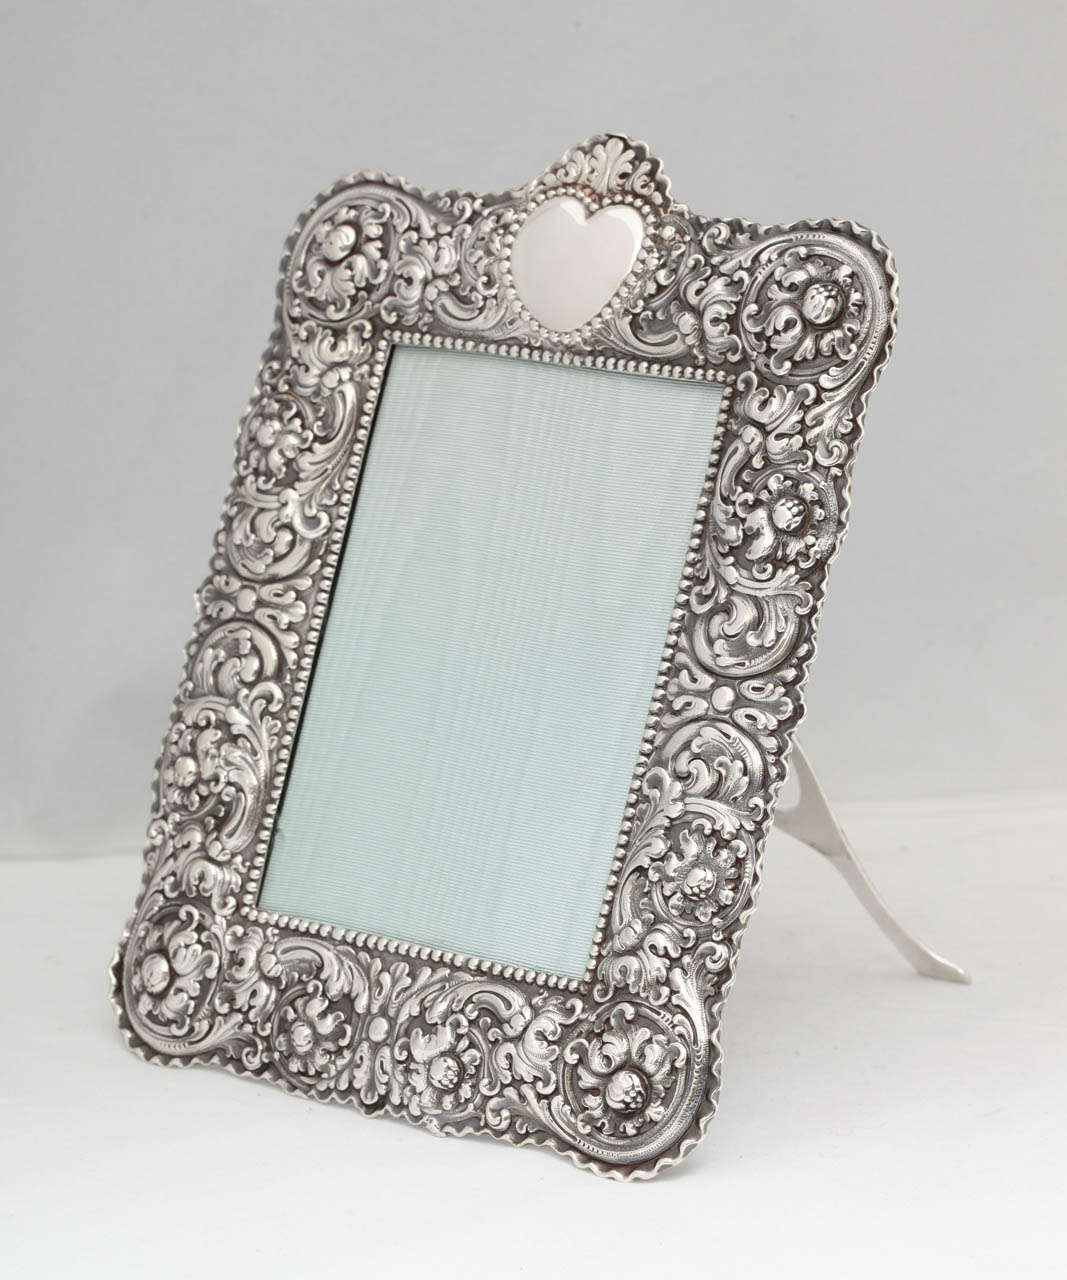 Sterling silver picture frame, Tiffany & Co., New York, year marked for 1890-1891. @9 1/2